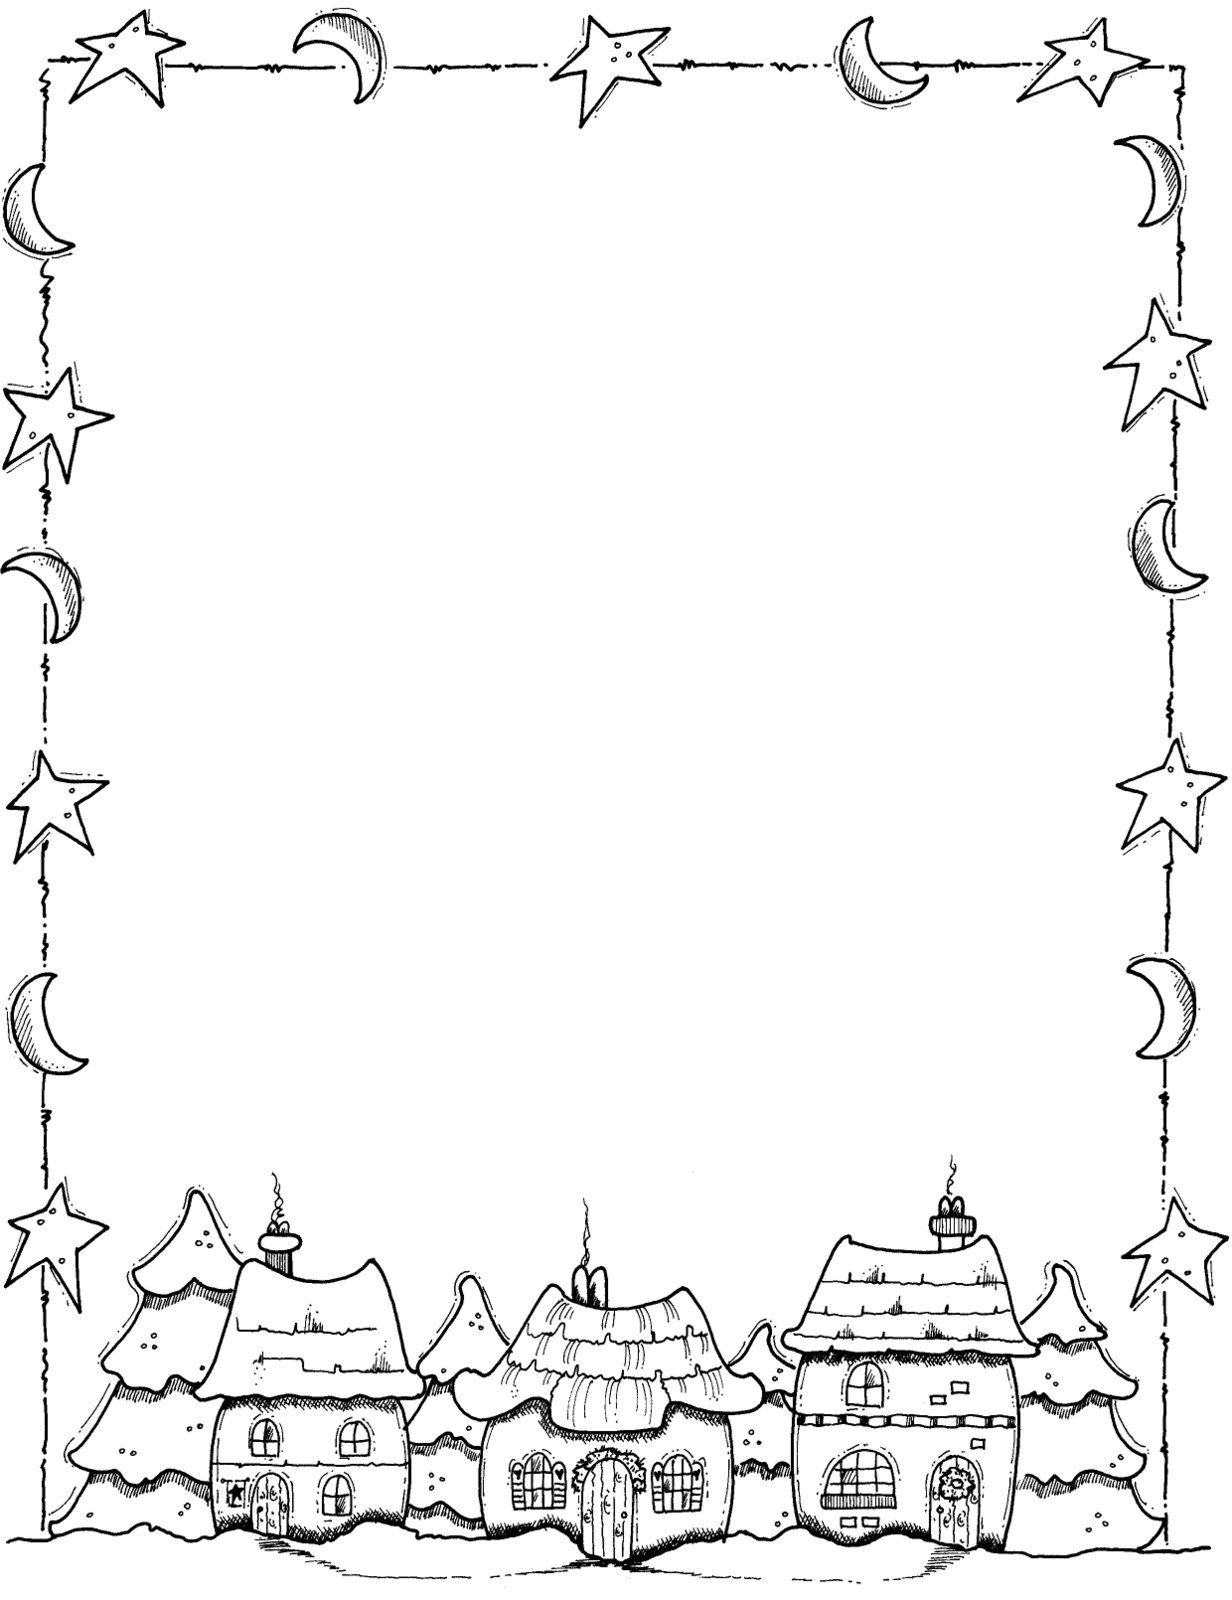 Coloring Page Border at GetColorings.com | Free printable ...
 Color Borders Design